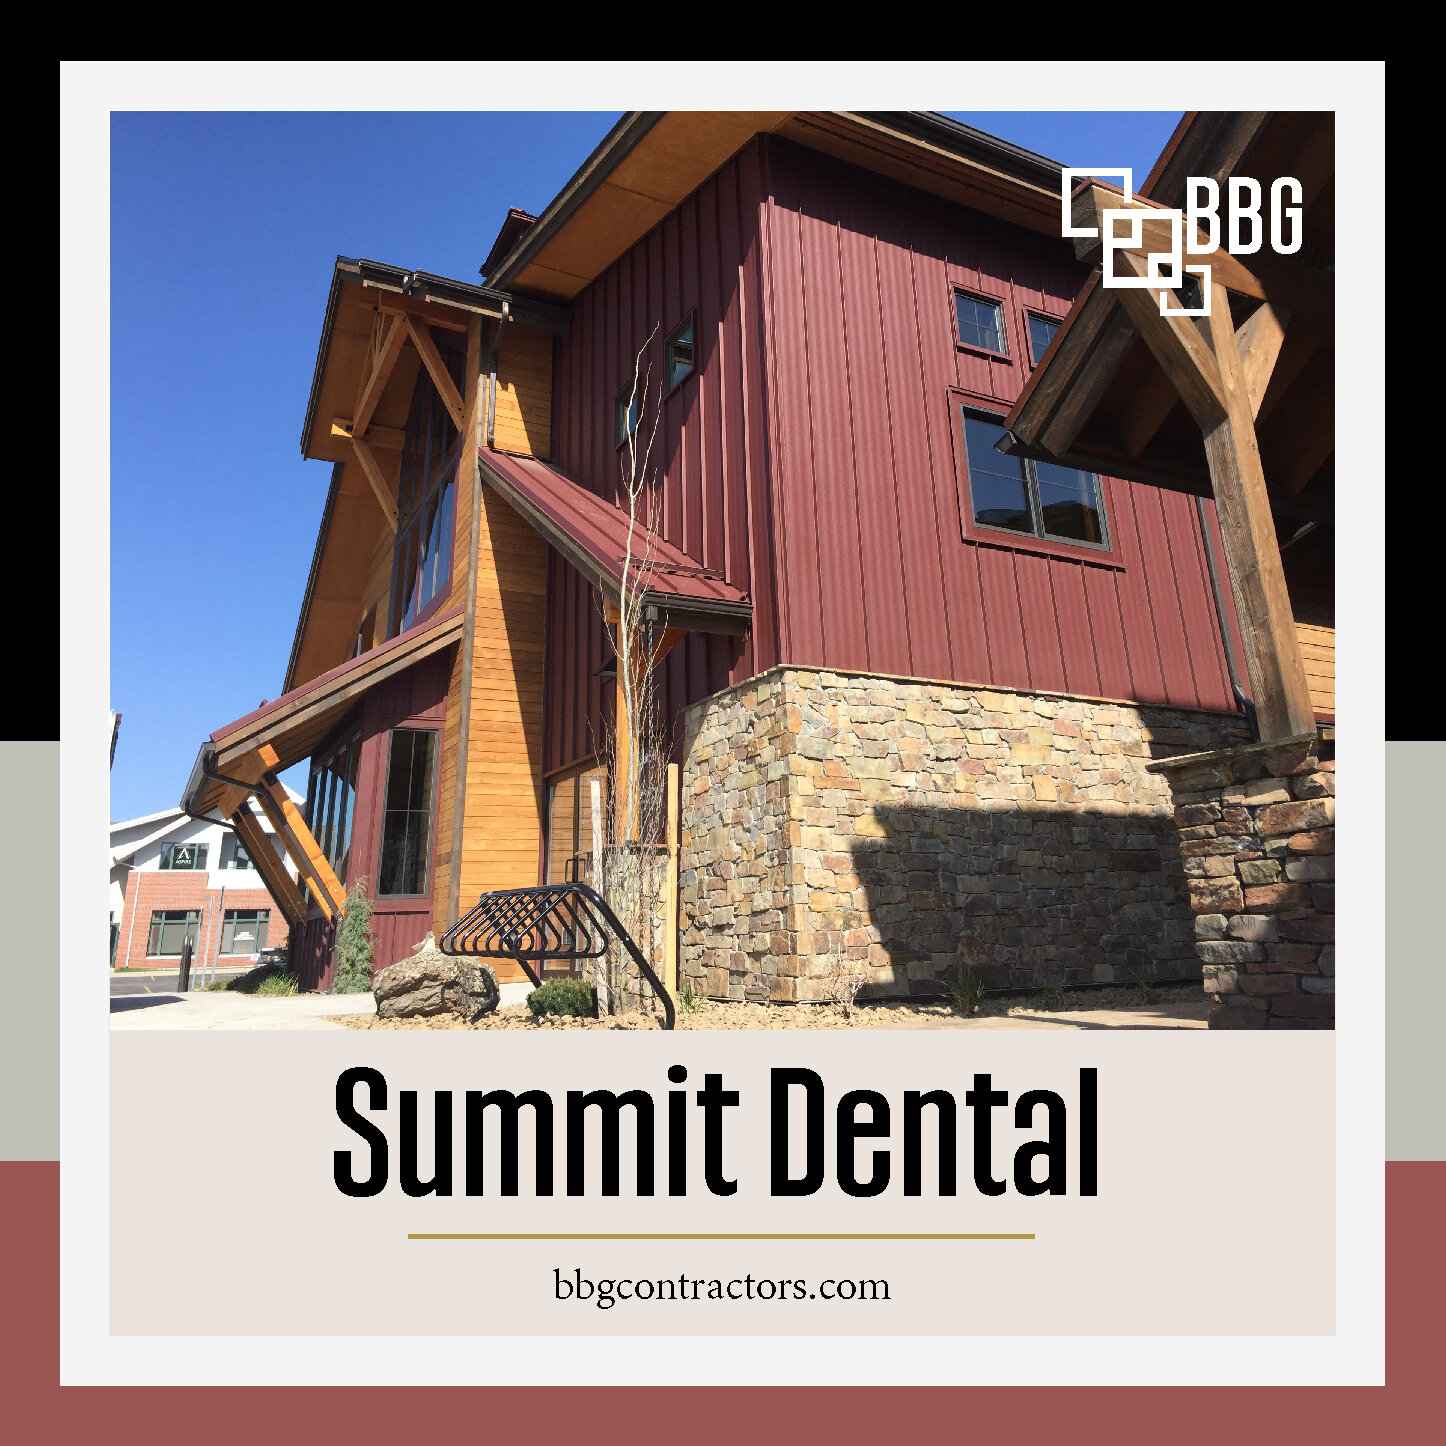 Another great project with great people!  Back in 2017 we had the opportunity to bring Dr Will Samson&rsquo;s vision to life in the Summit Dental Building in Bozeman.  Integrating the functionality and efficient operations of a dental office with the